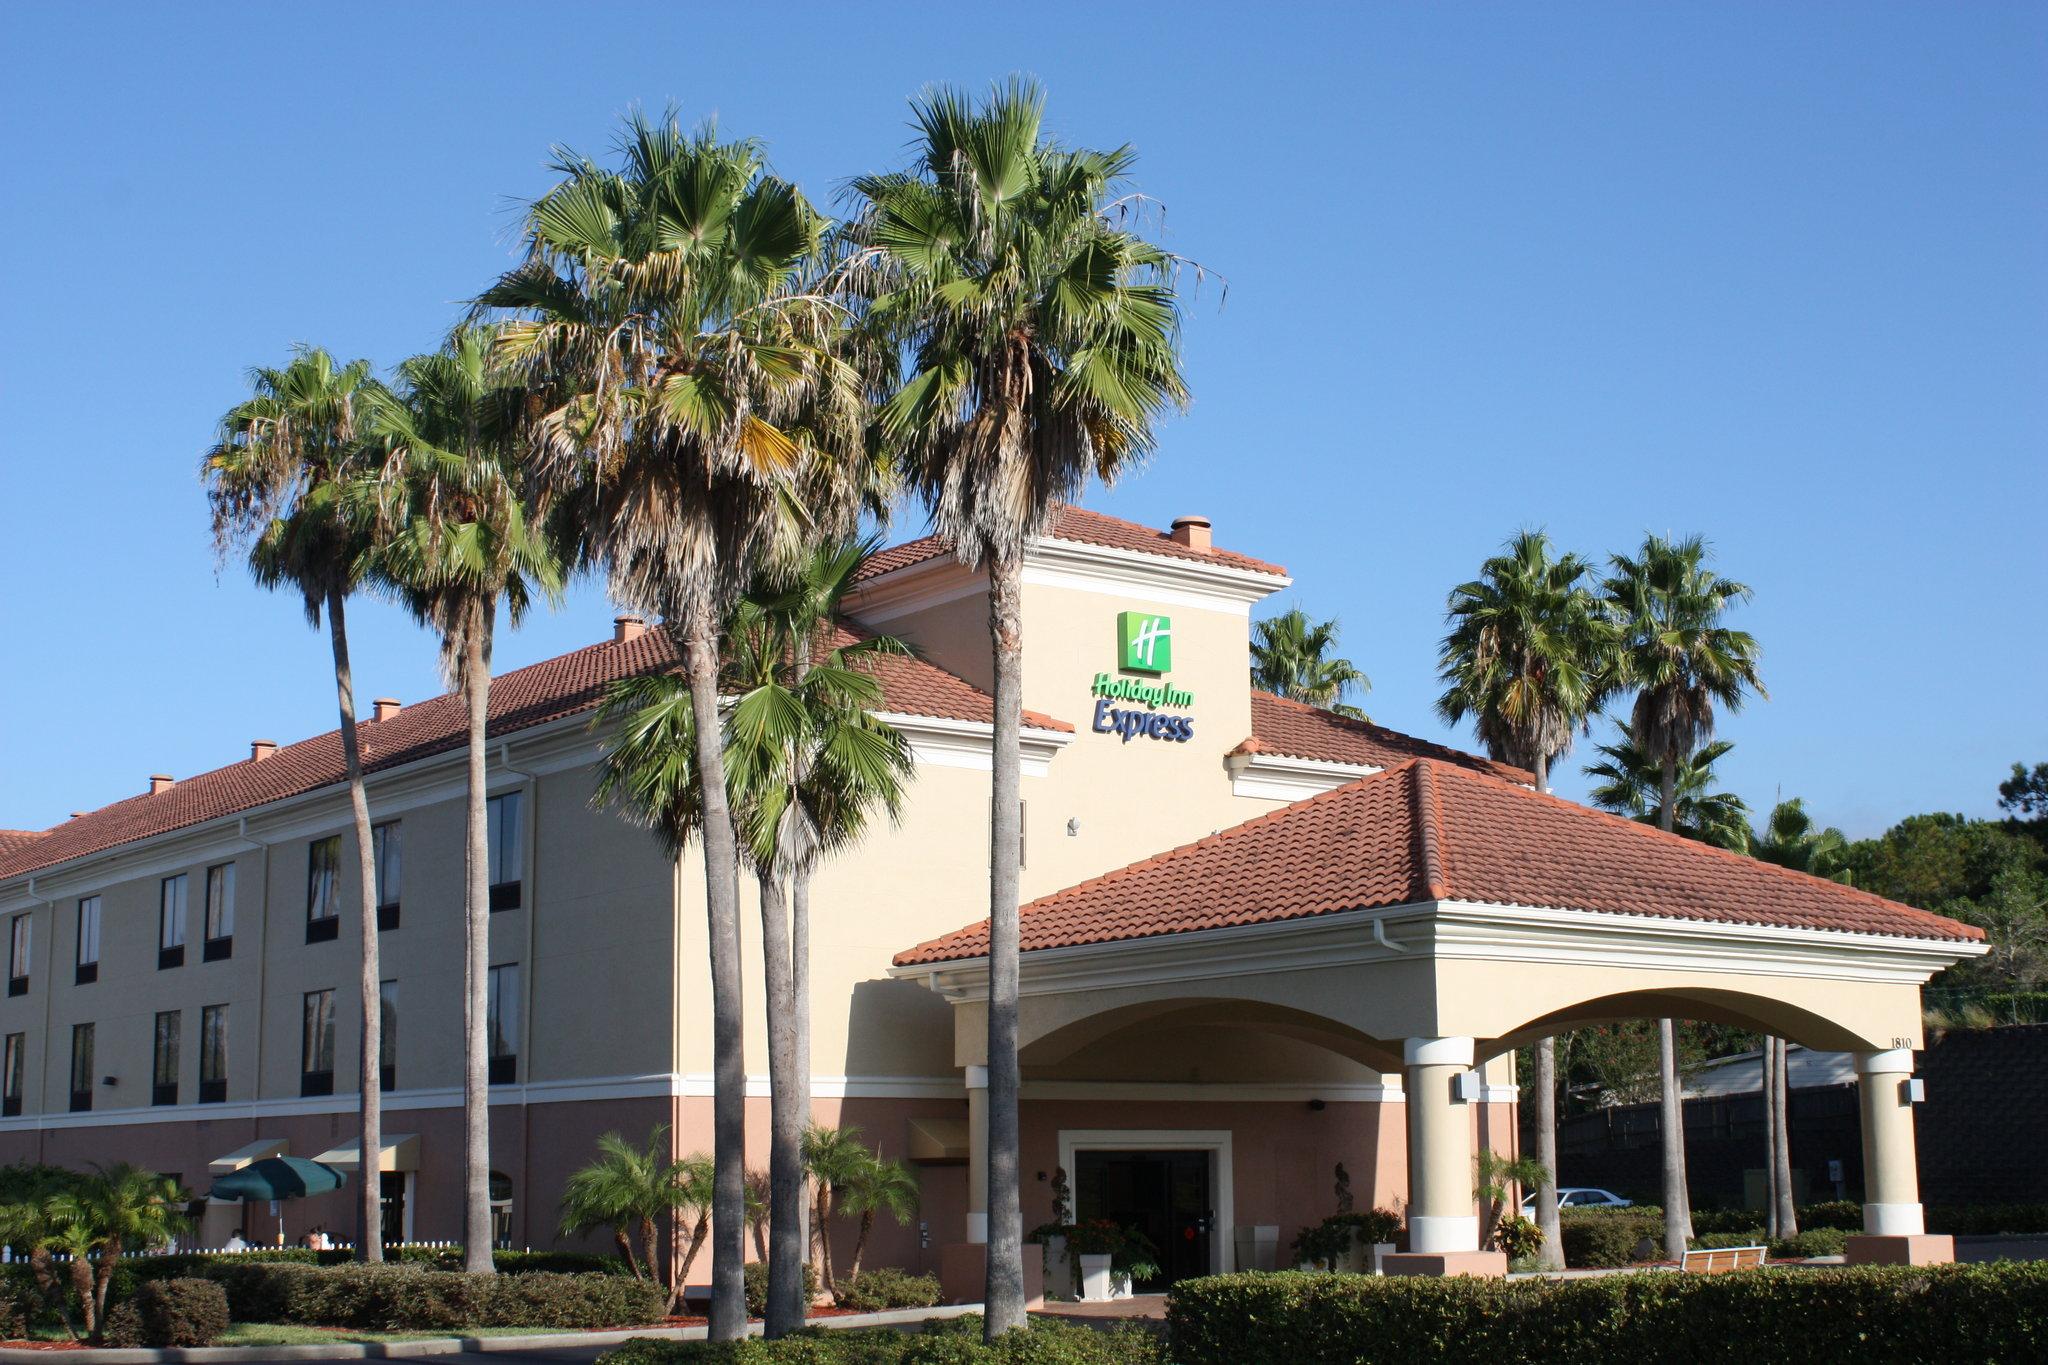 Holiday Inn Express Hotel Clermont in Clermont, FL